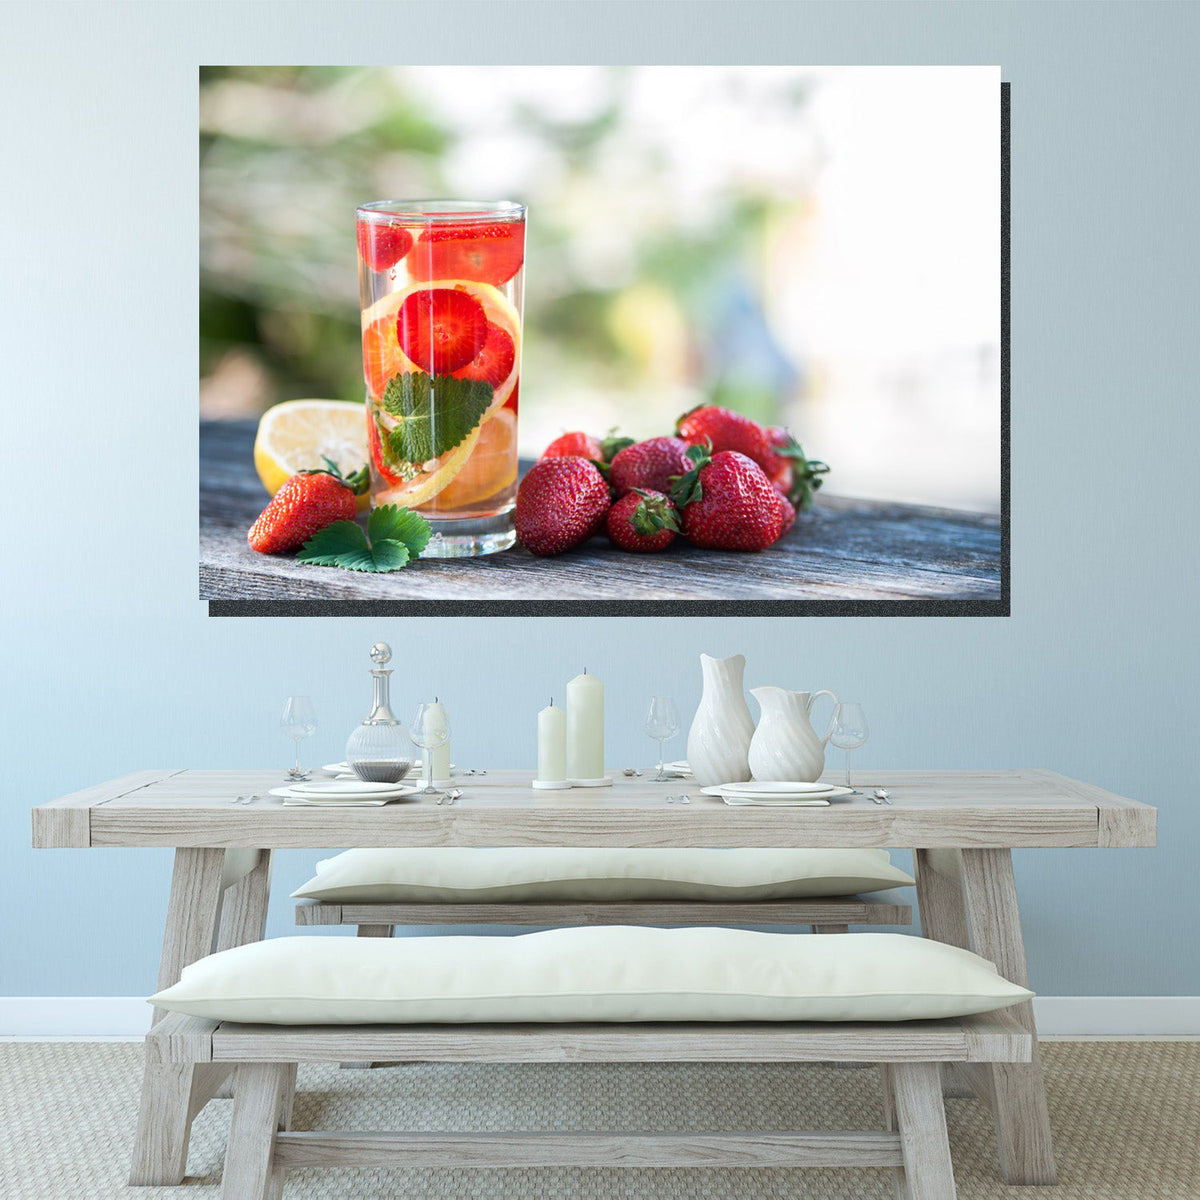 https://cdn.shopify.com/s/files/1/0387/9986/8044/products/StrawberryCleanseCanvasArtprintStretched-1.jpg